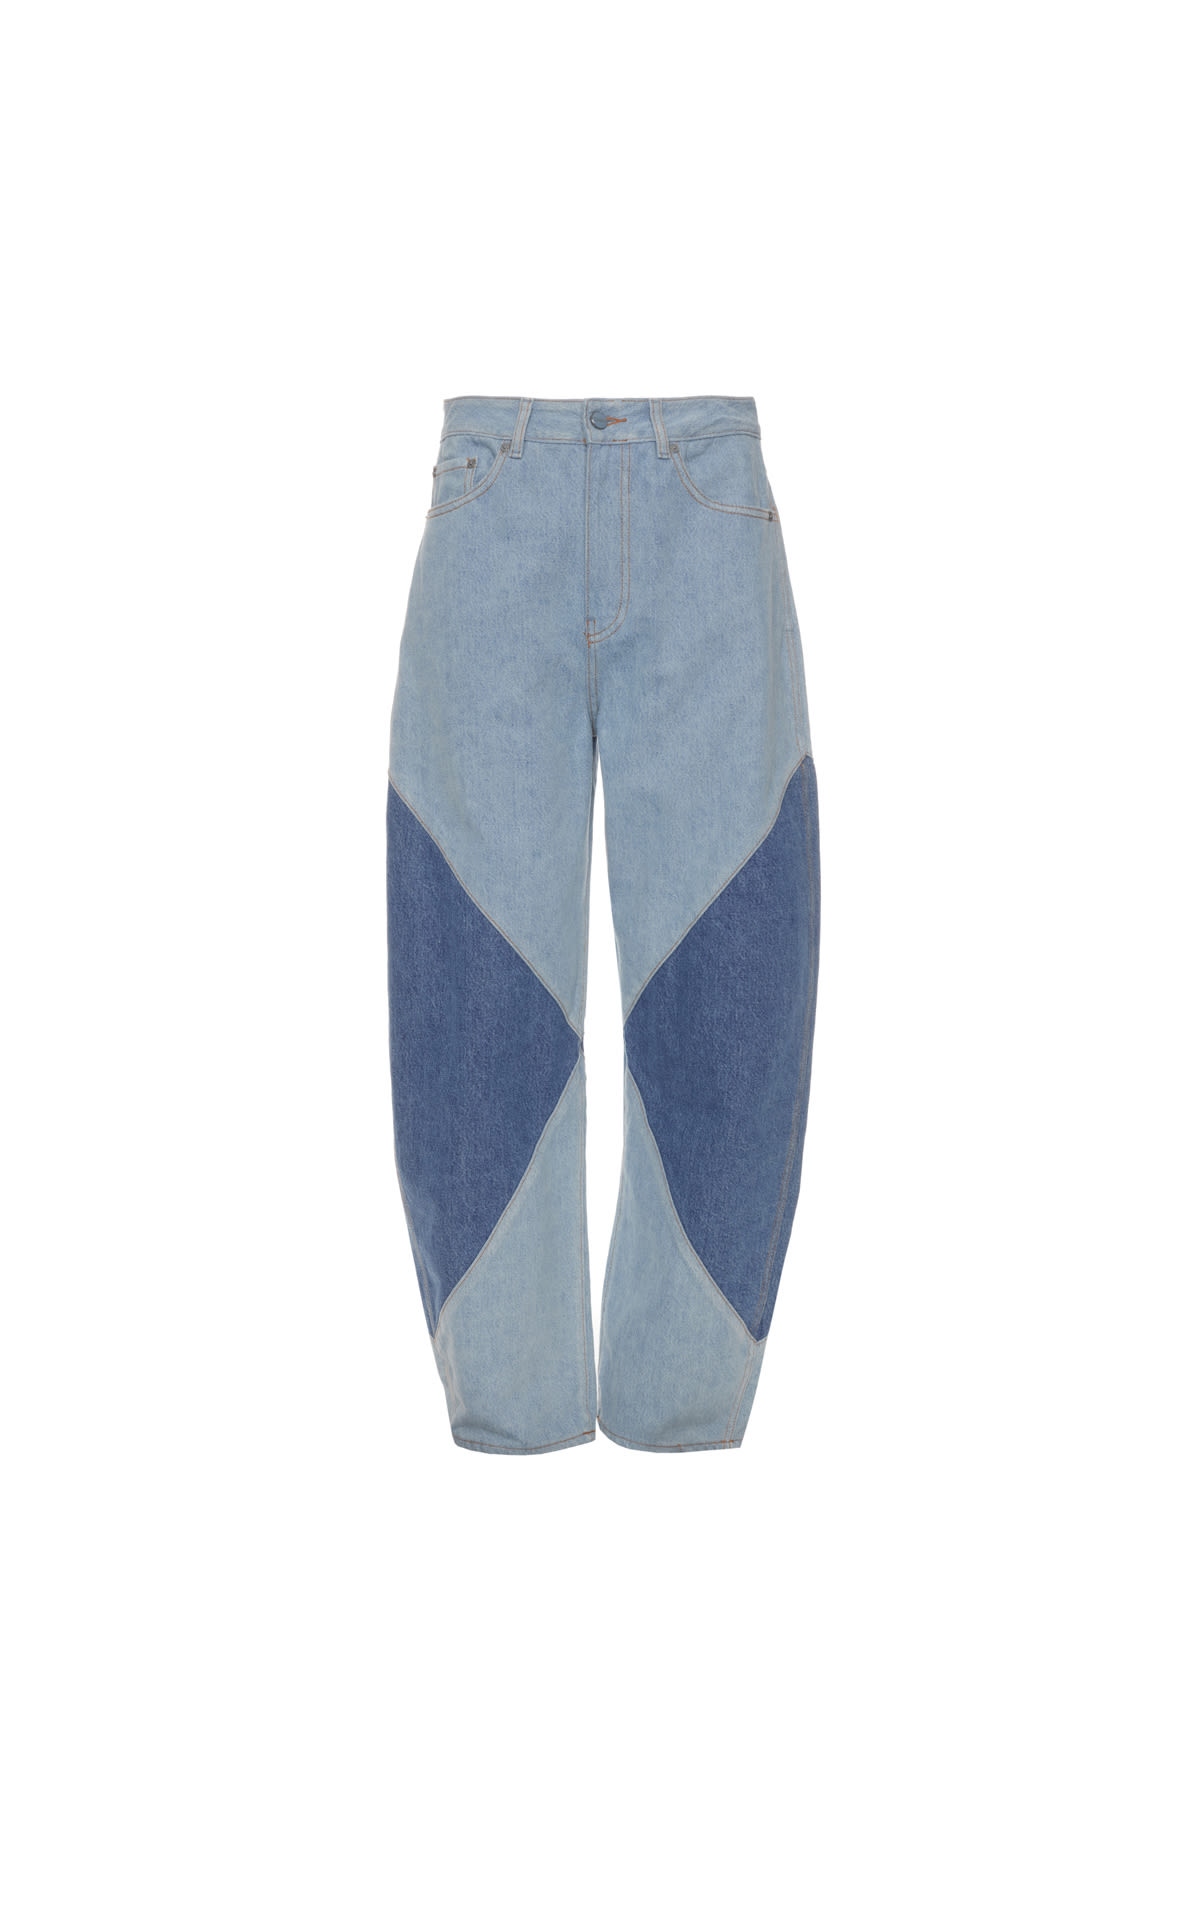 Ganni Patch jeans from Bicester Village